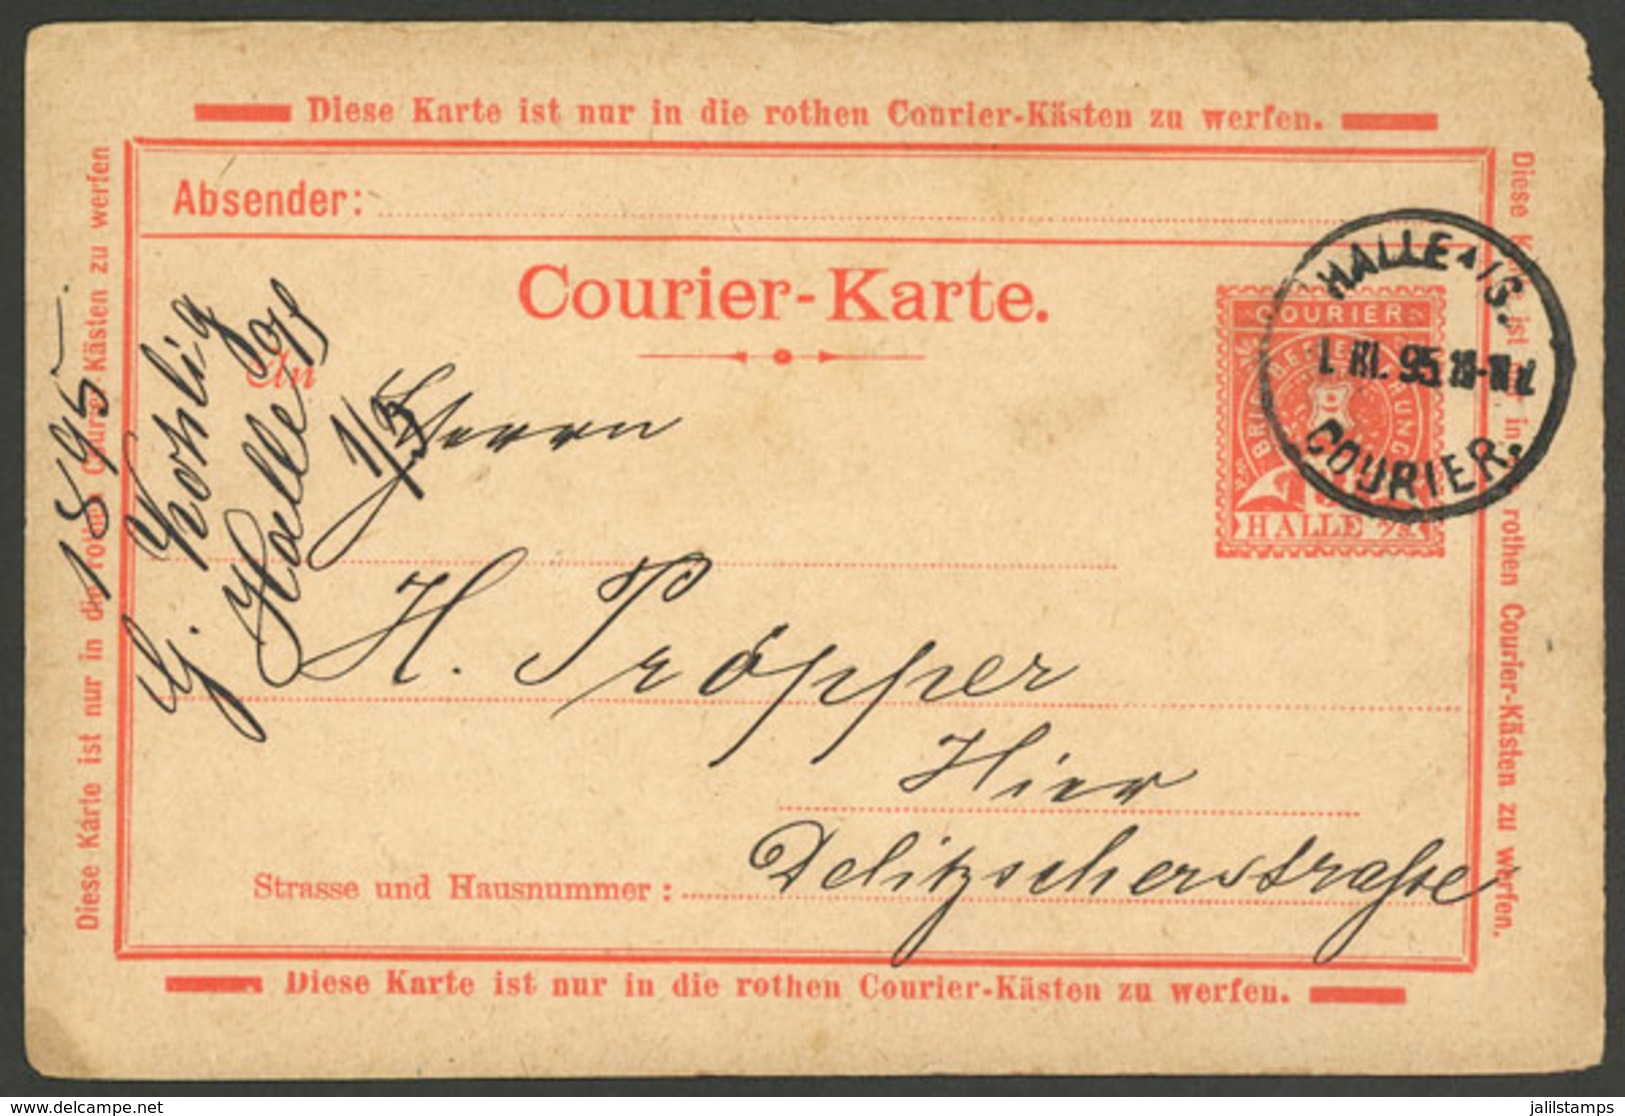 GERMANY: Postal Card Of Private Post Used In Halle On 1/MAR/1895, VF And Attractive! - Lettres & Documents